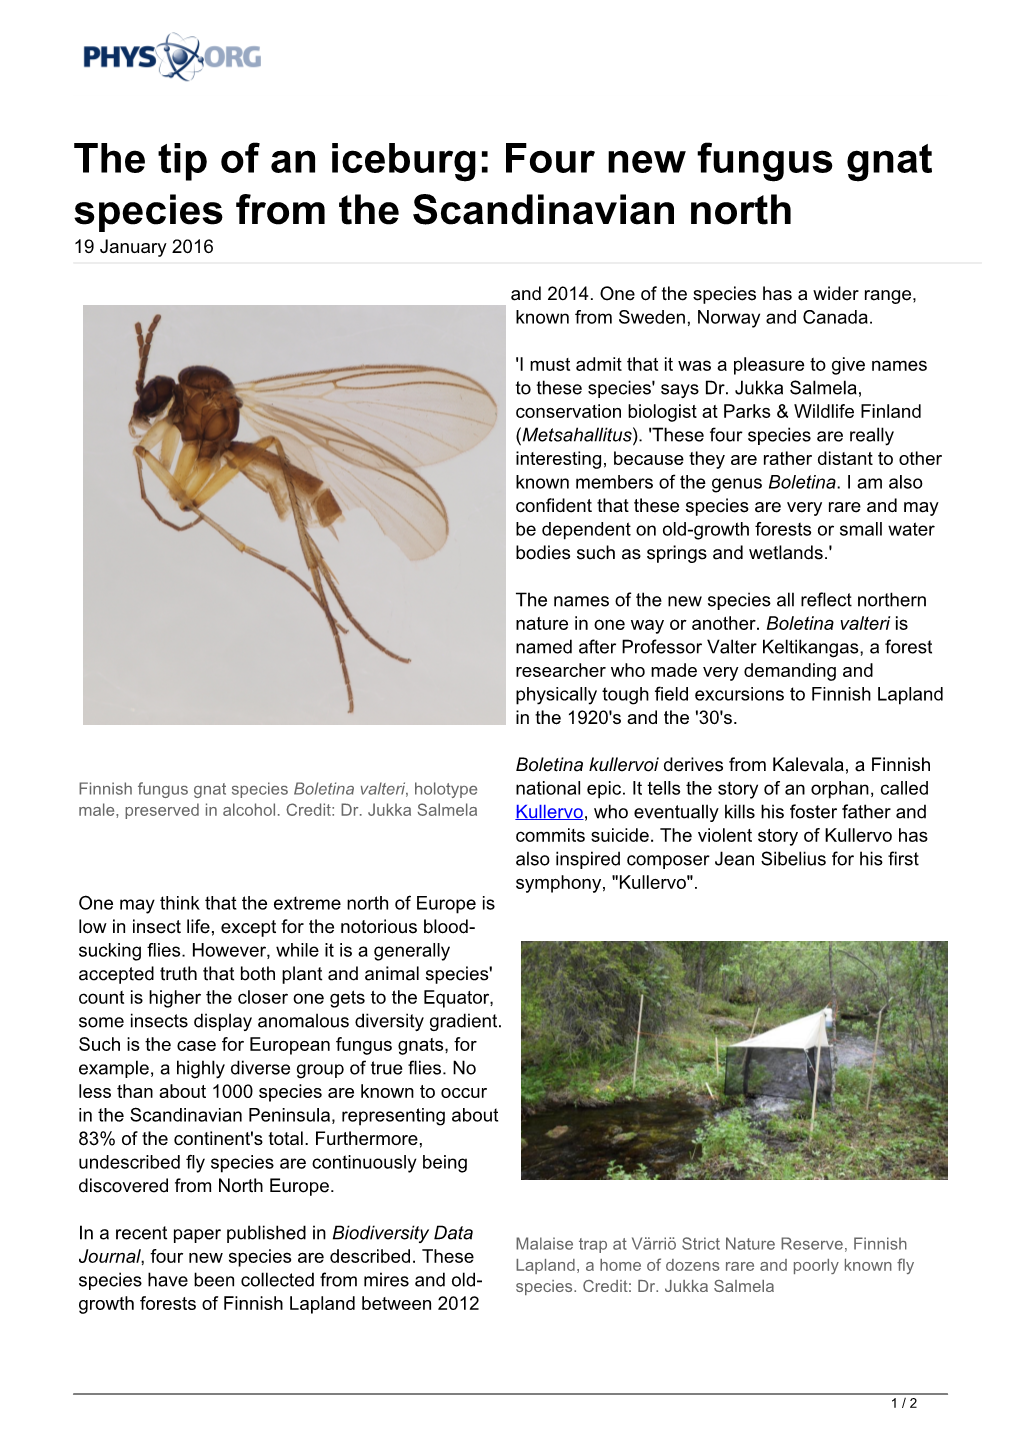 Four New Fungus Gnat Species from the Scandinavian North 19 January 2016